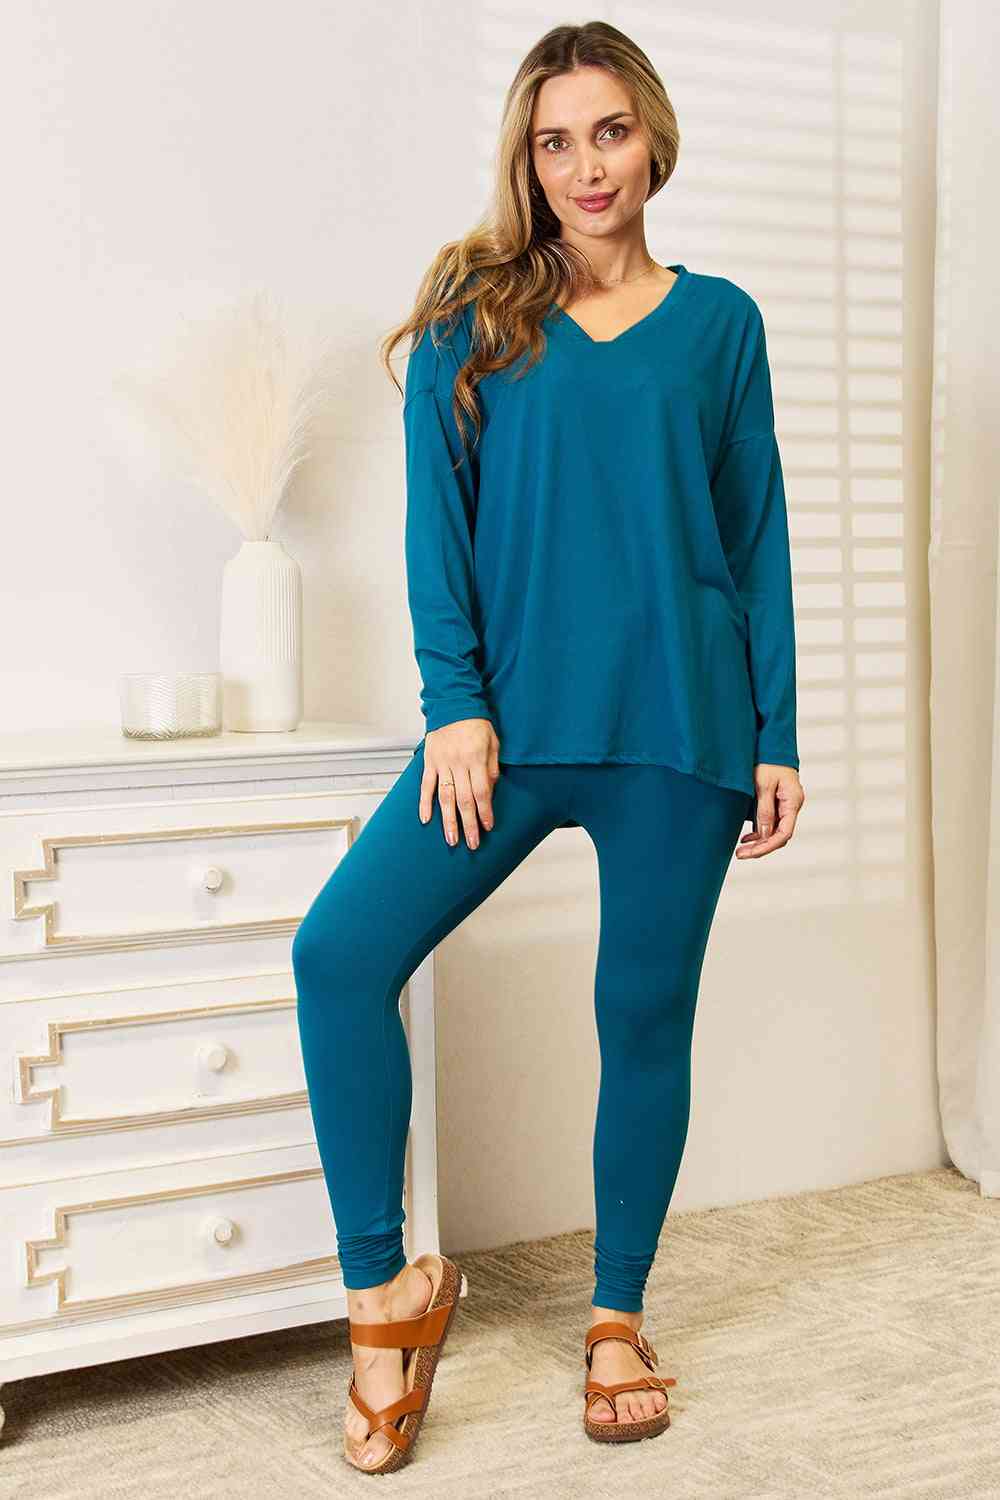 Zenana Ready to Relax Full Size Brushed Microfiber Loungewear Set in Bright  Blue - Ships from The US - Bright Blue …